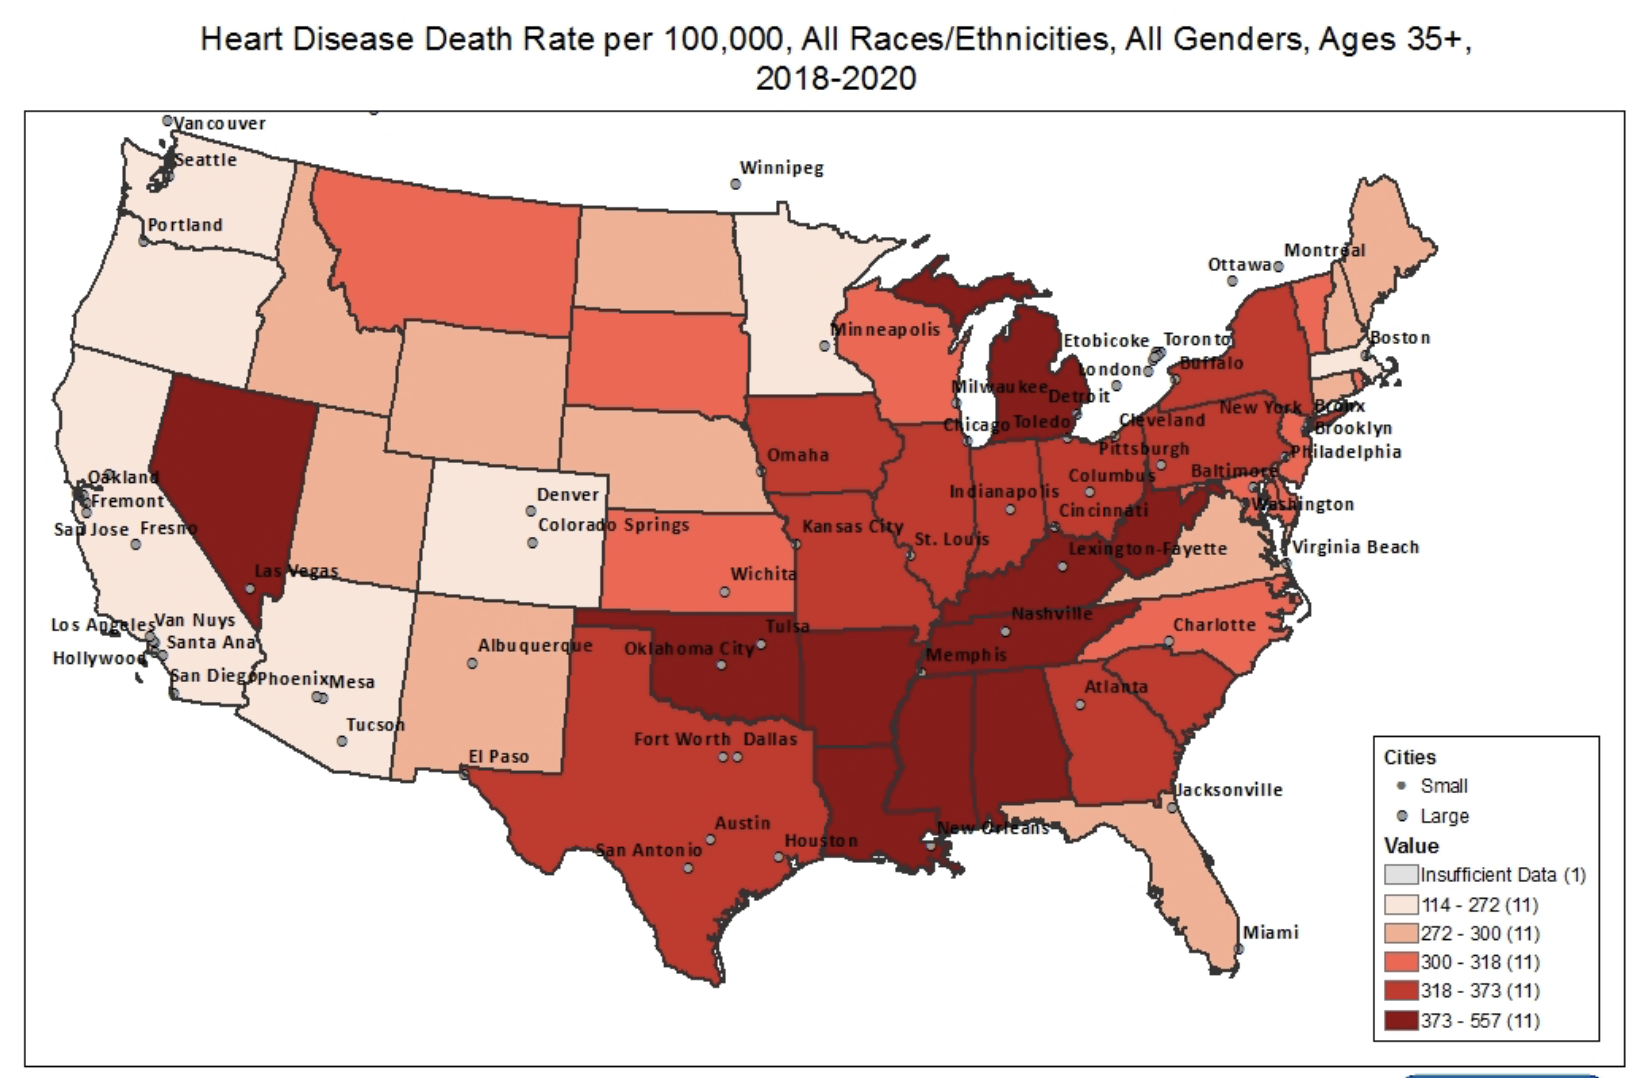 heart disease death rate per 100,000, United States